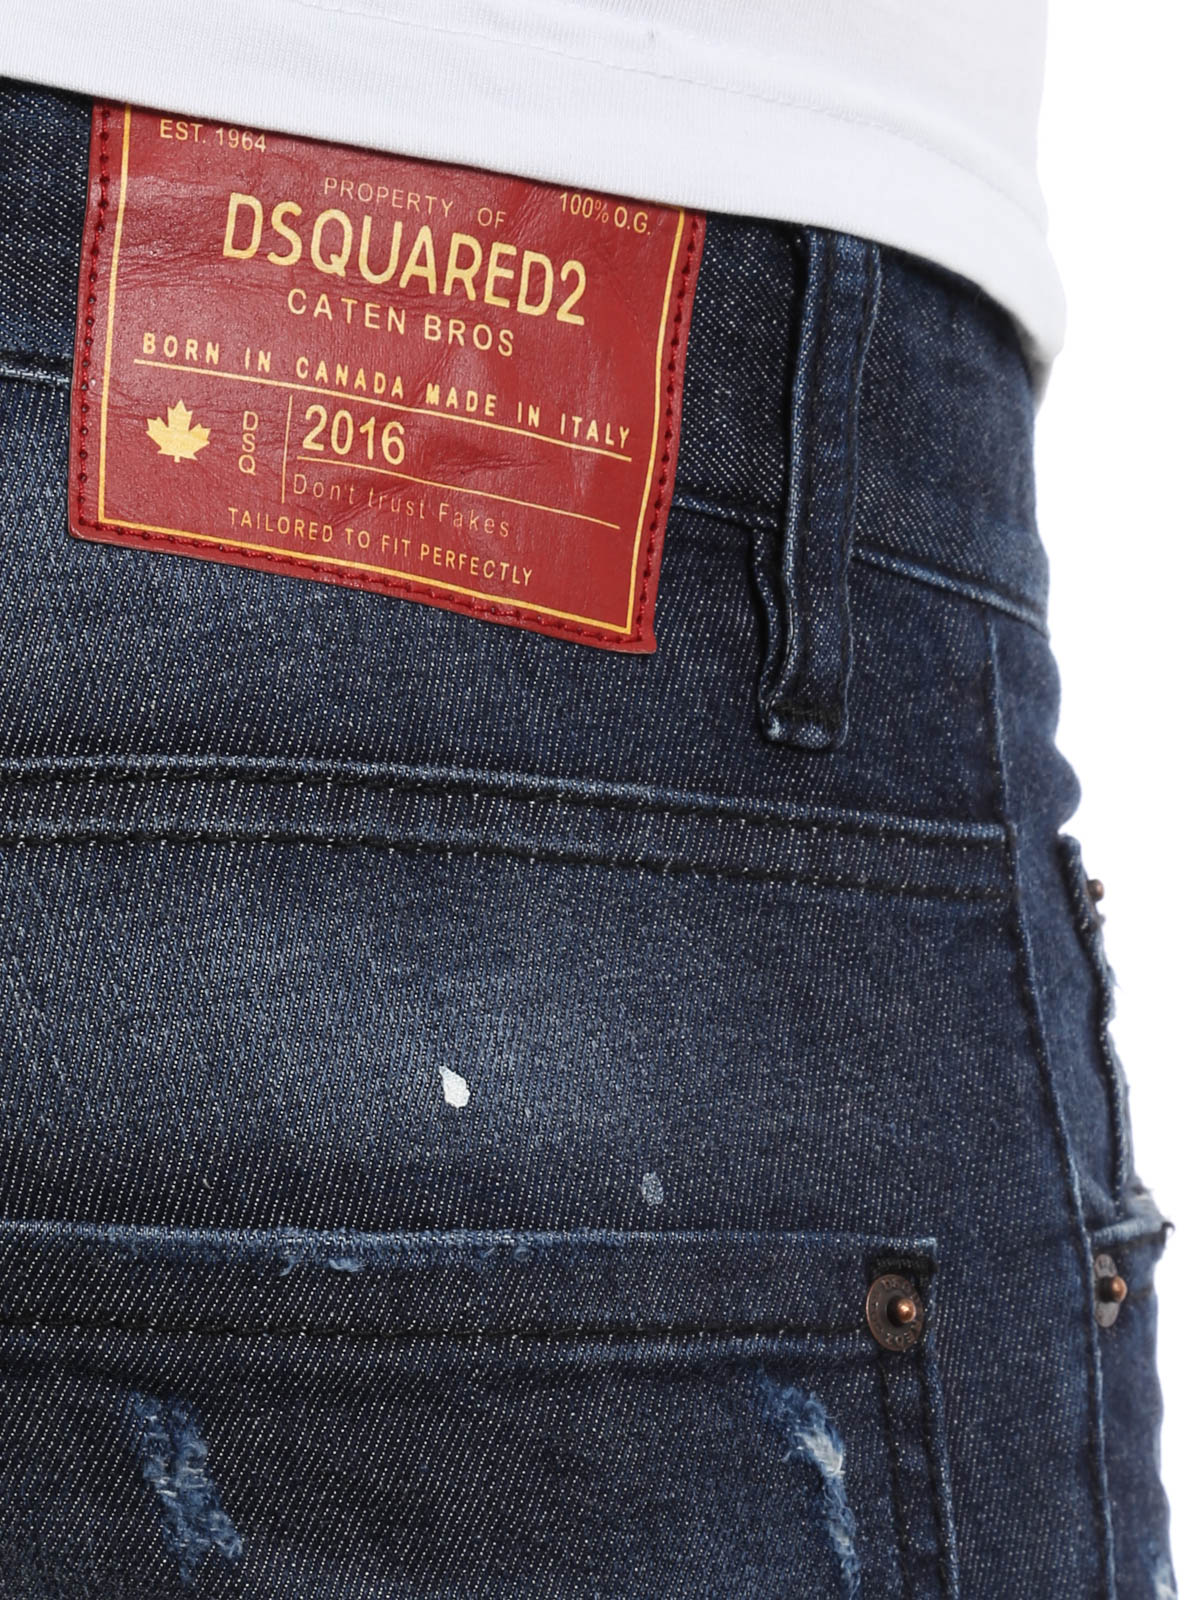 dsquared2 jeans 1964